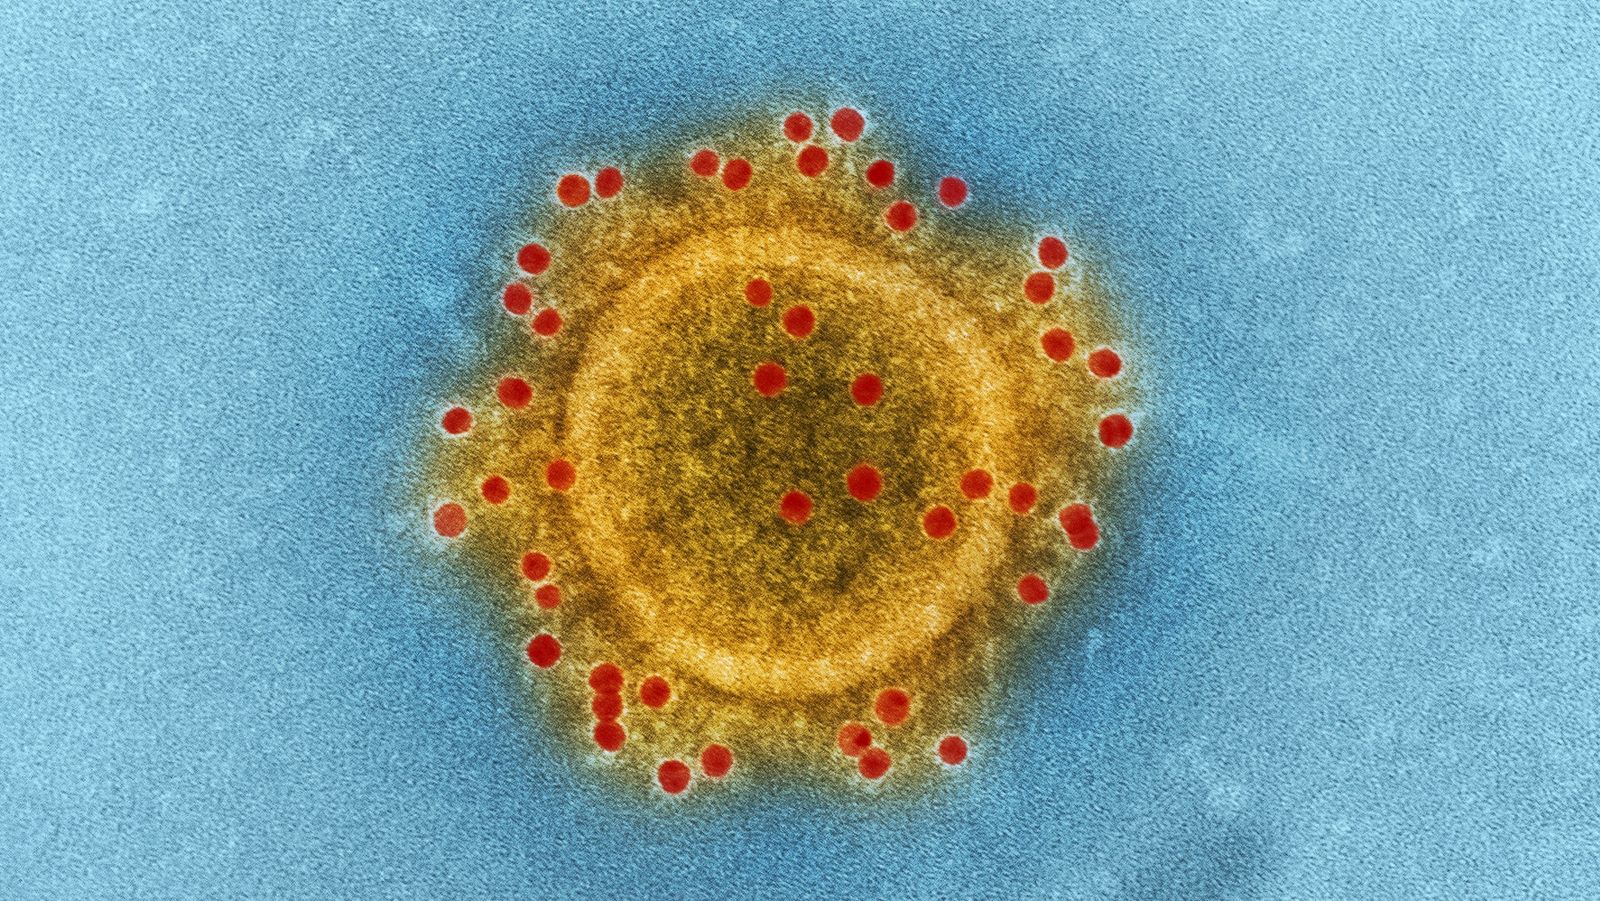 Researchers identified over 5,500 new viruses in the ocean